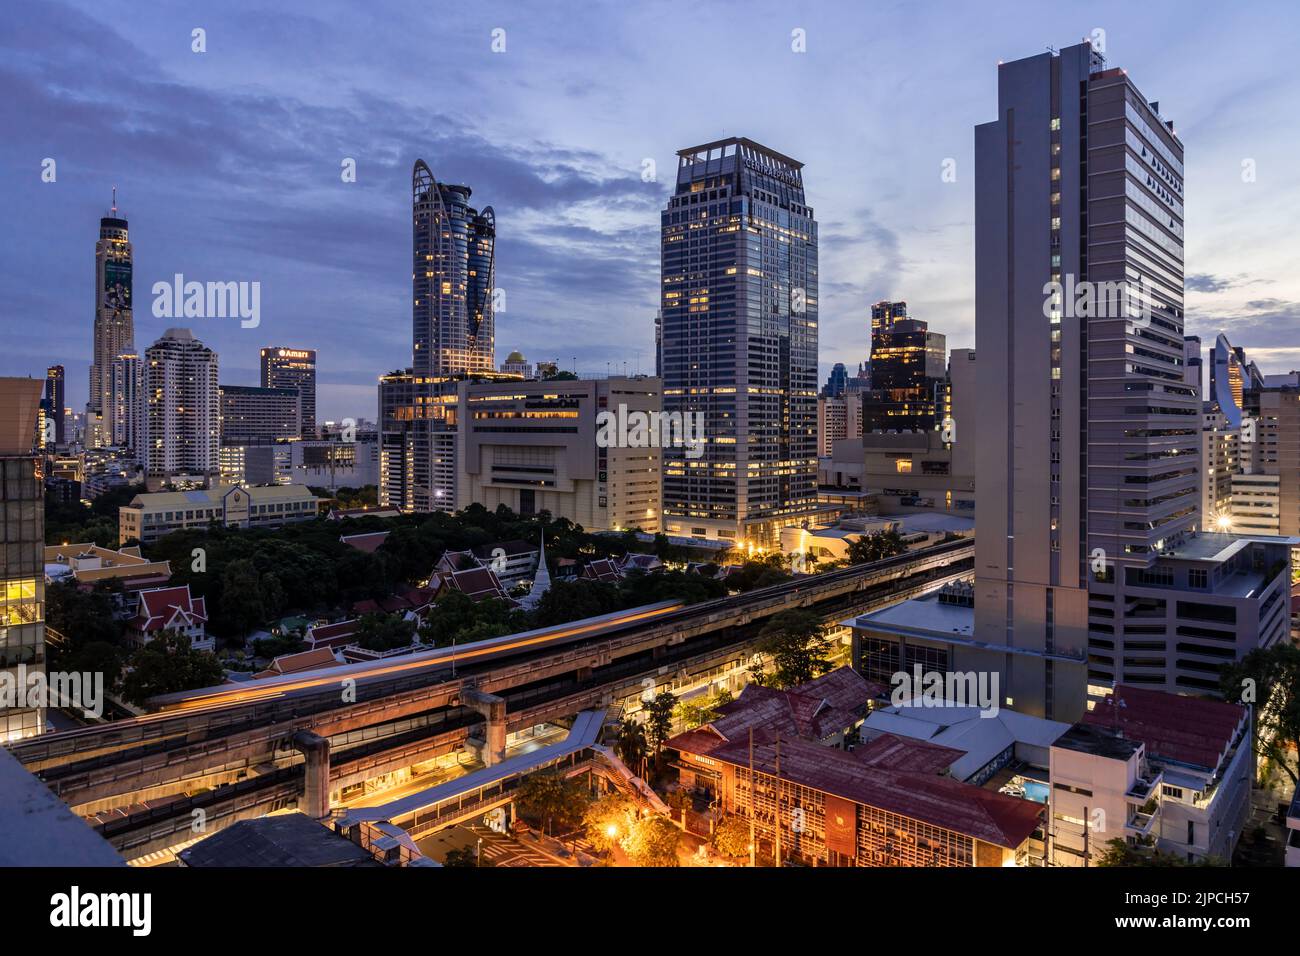 Bangkok, Thailand - 11 August 2022 - Aerial view of Bangkok cityscape in the morning before sunrise showing high-rises and running BTS skytrains and c Stock Photo